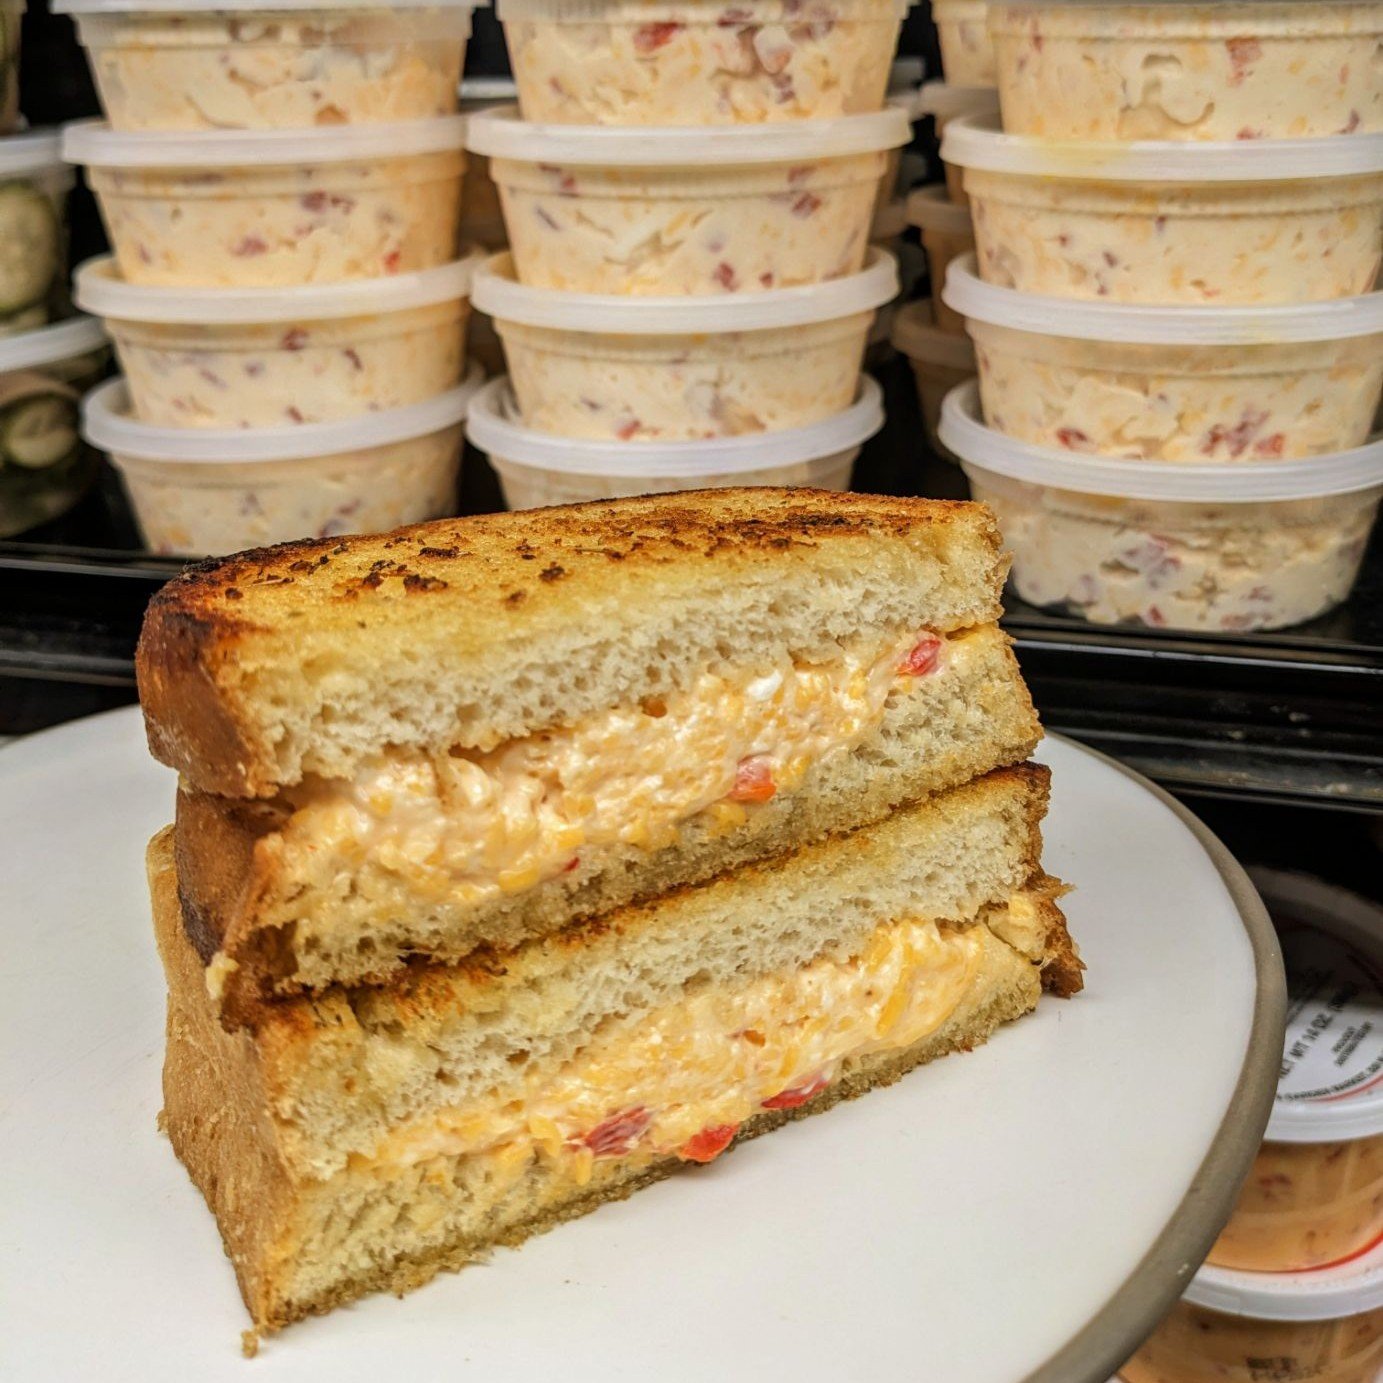 Pimento cheese is famous around here...but it's extra famous during the Masters Tournament.

Pick up your Steve's Homestyle Pimento Cheese Spread and double down with this week's DELI SANDWICH SPECIAL -&gt;&gt;&gt; House pimento cheese on grilled sou